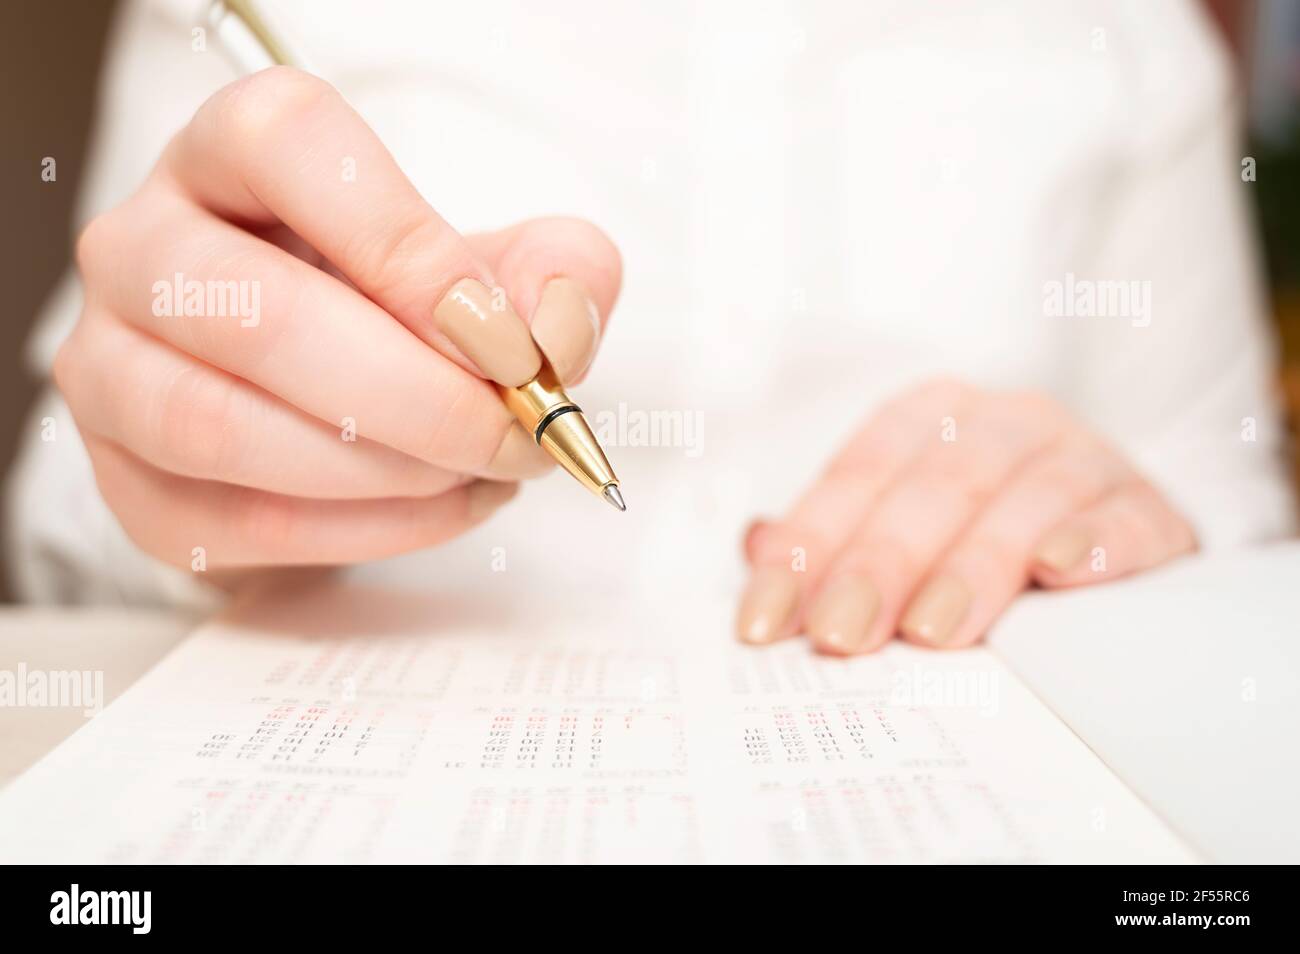 Female hand holding a pen to mark the date in calendar. Calendar reminder, daily planning Stock Photo